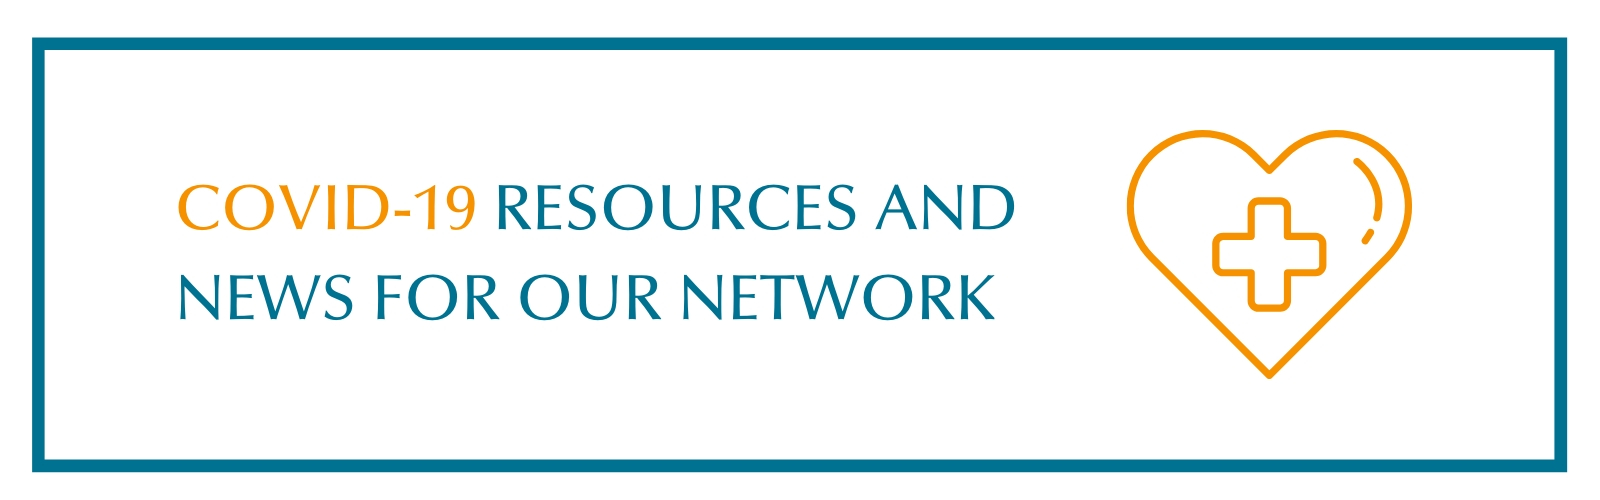 Covid-19 Resources & News for our Network